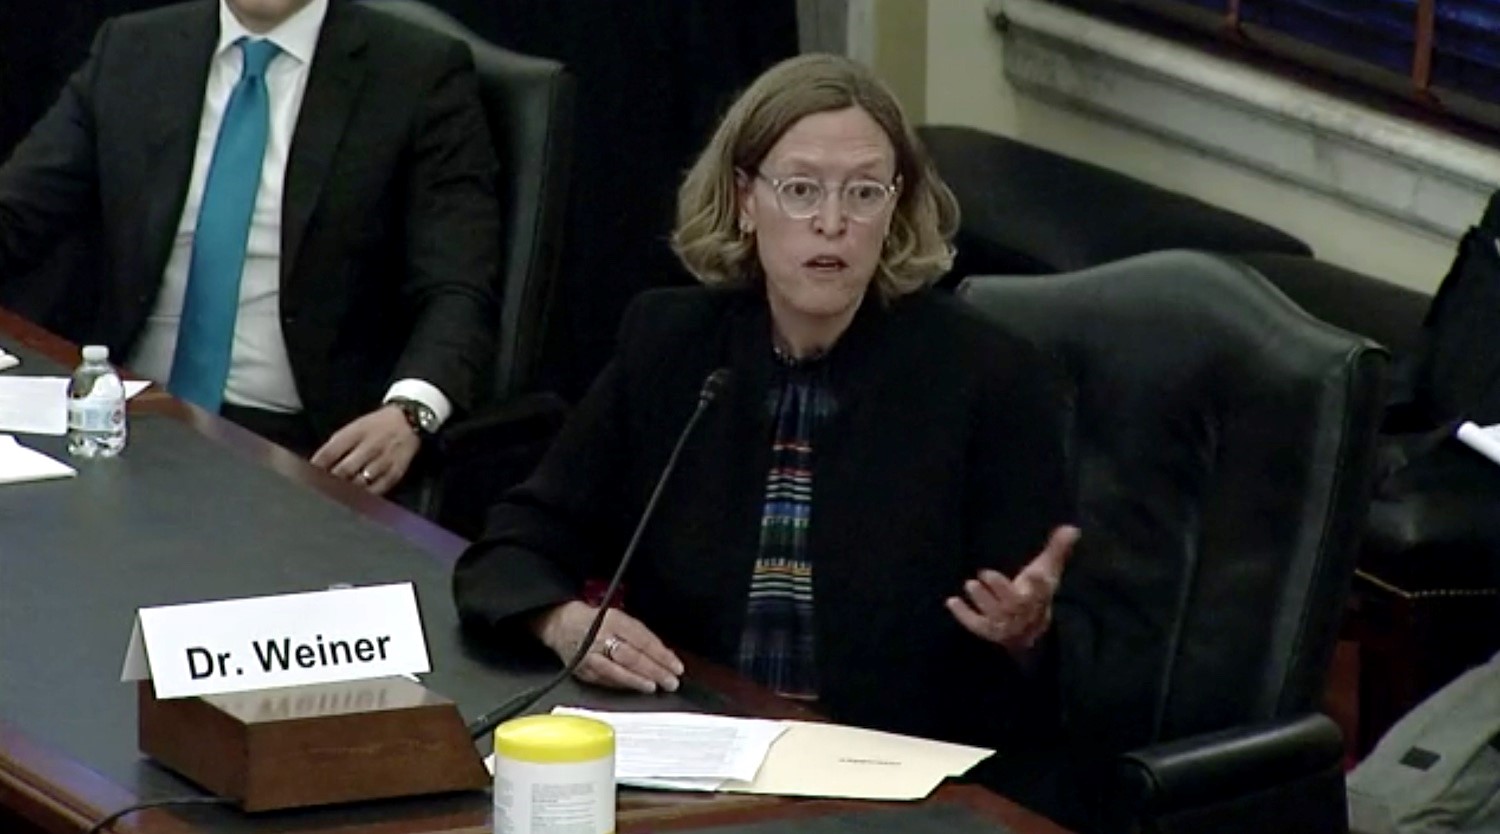 Sharon Weiner testifies to Senate Armed Services Committee on U.S. Nuclear Deterrence Policy and Strategy